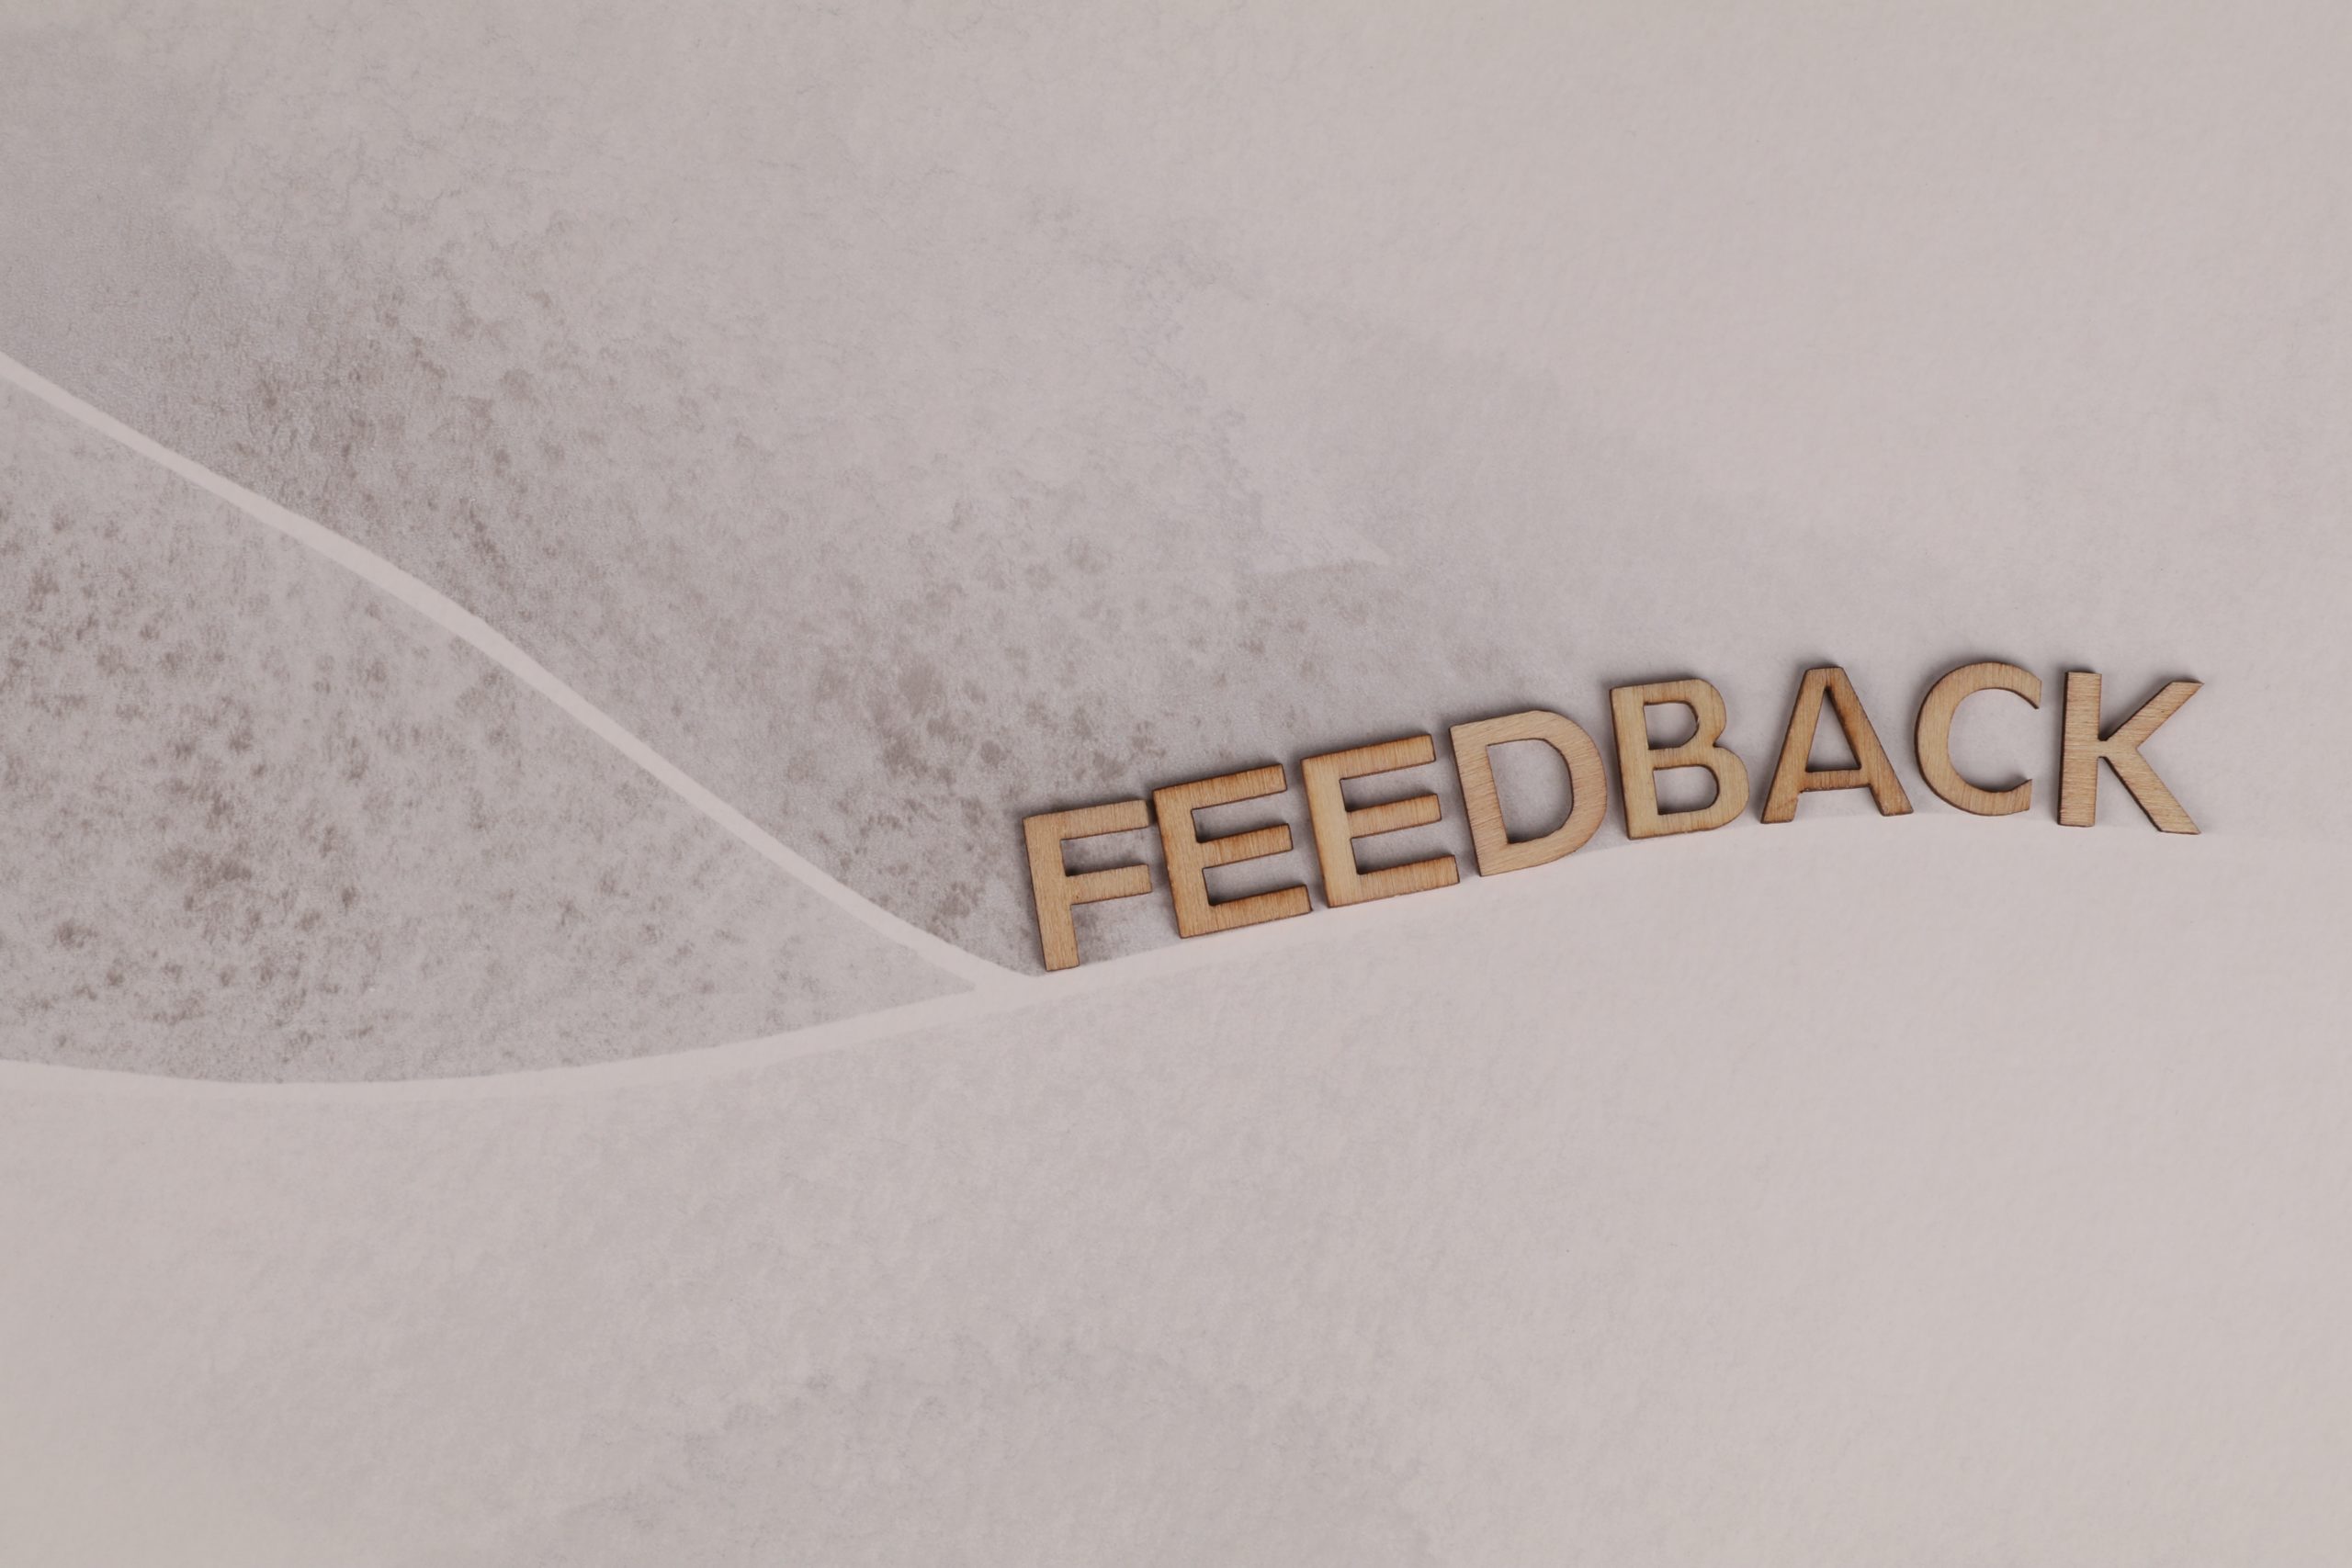 the words 'feedback' on a sandy textured background